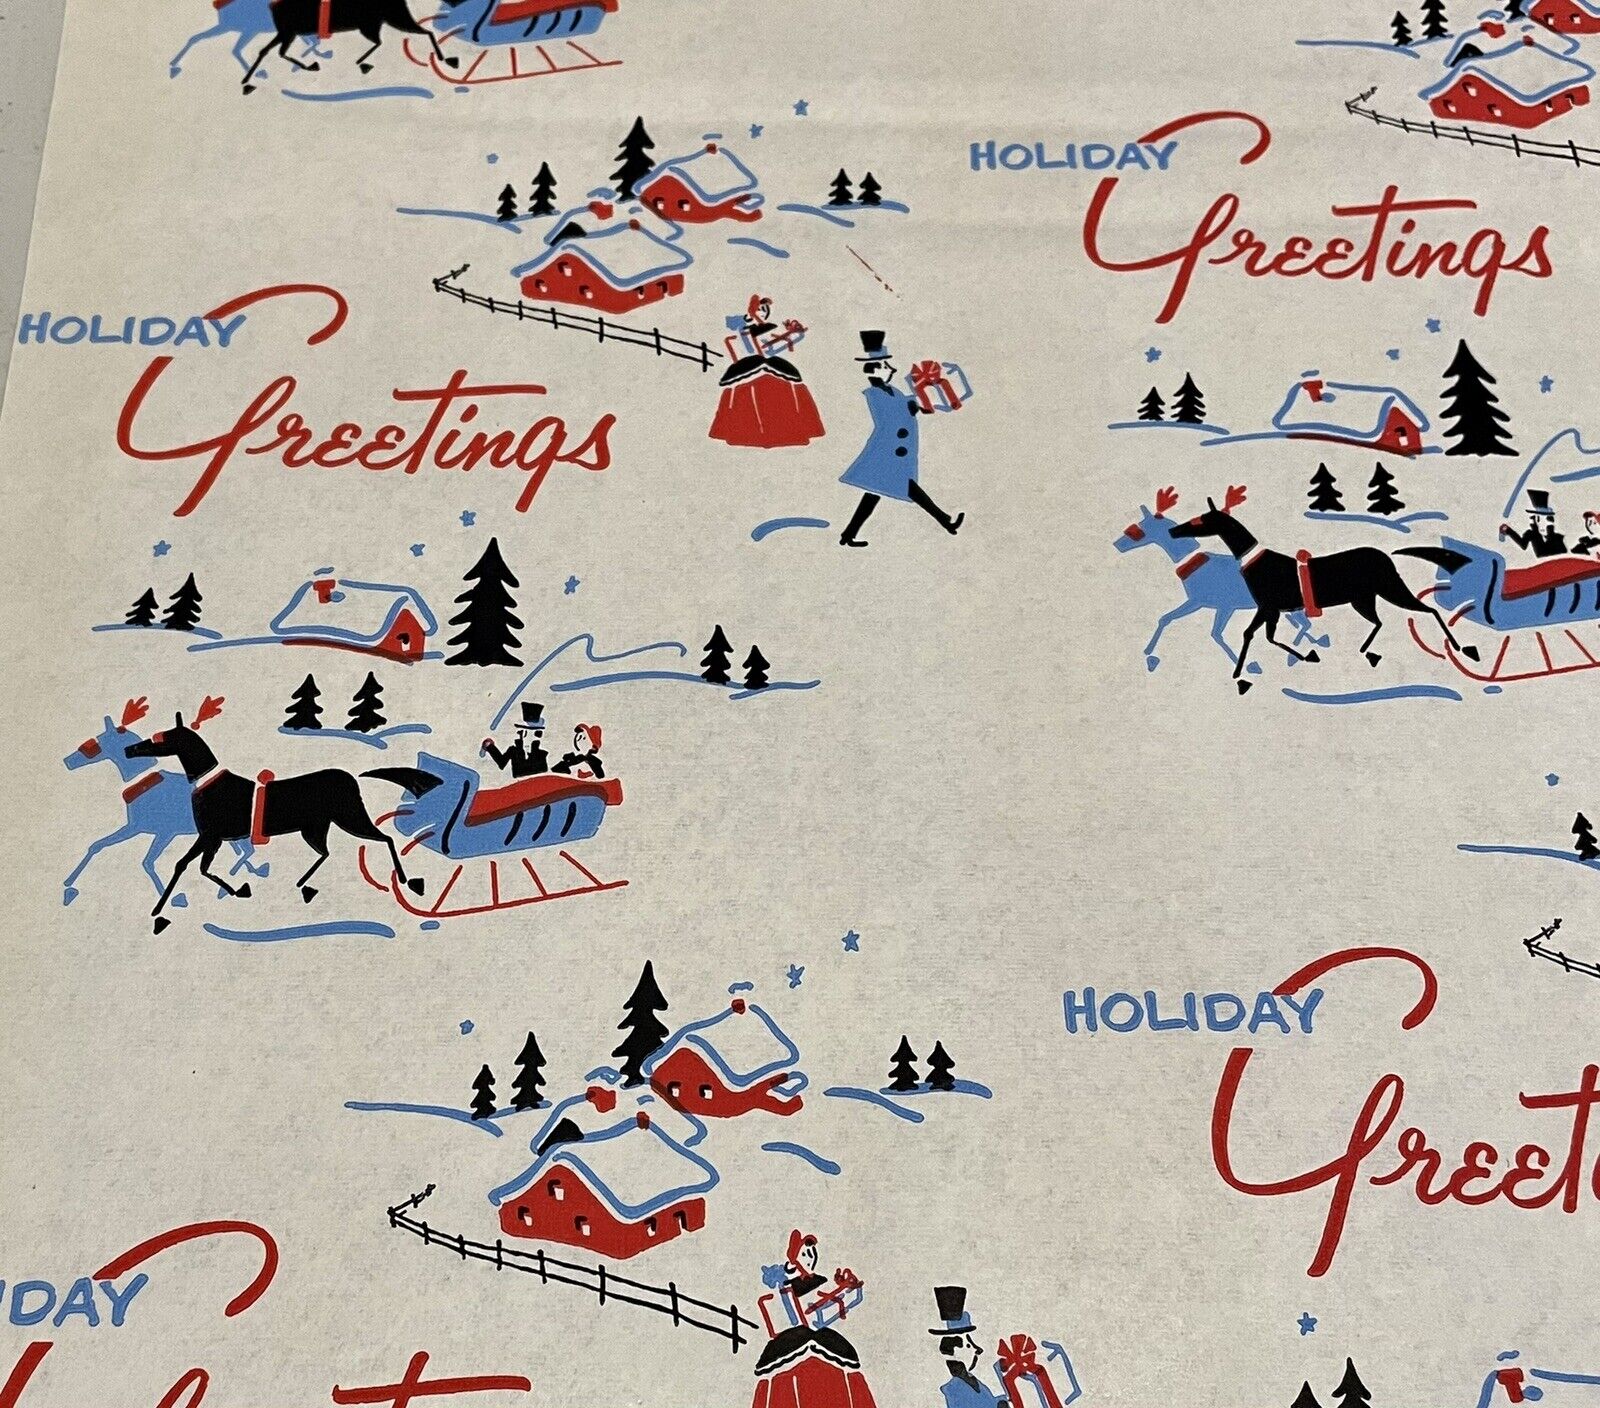 VTG CHRISTMAS WRAPPING PAPER GIFT WRAP  HOLIDAY GREETINGS 1940s SLEIGH WINTER